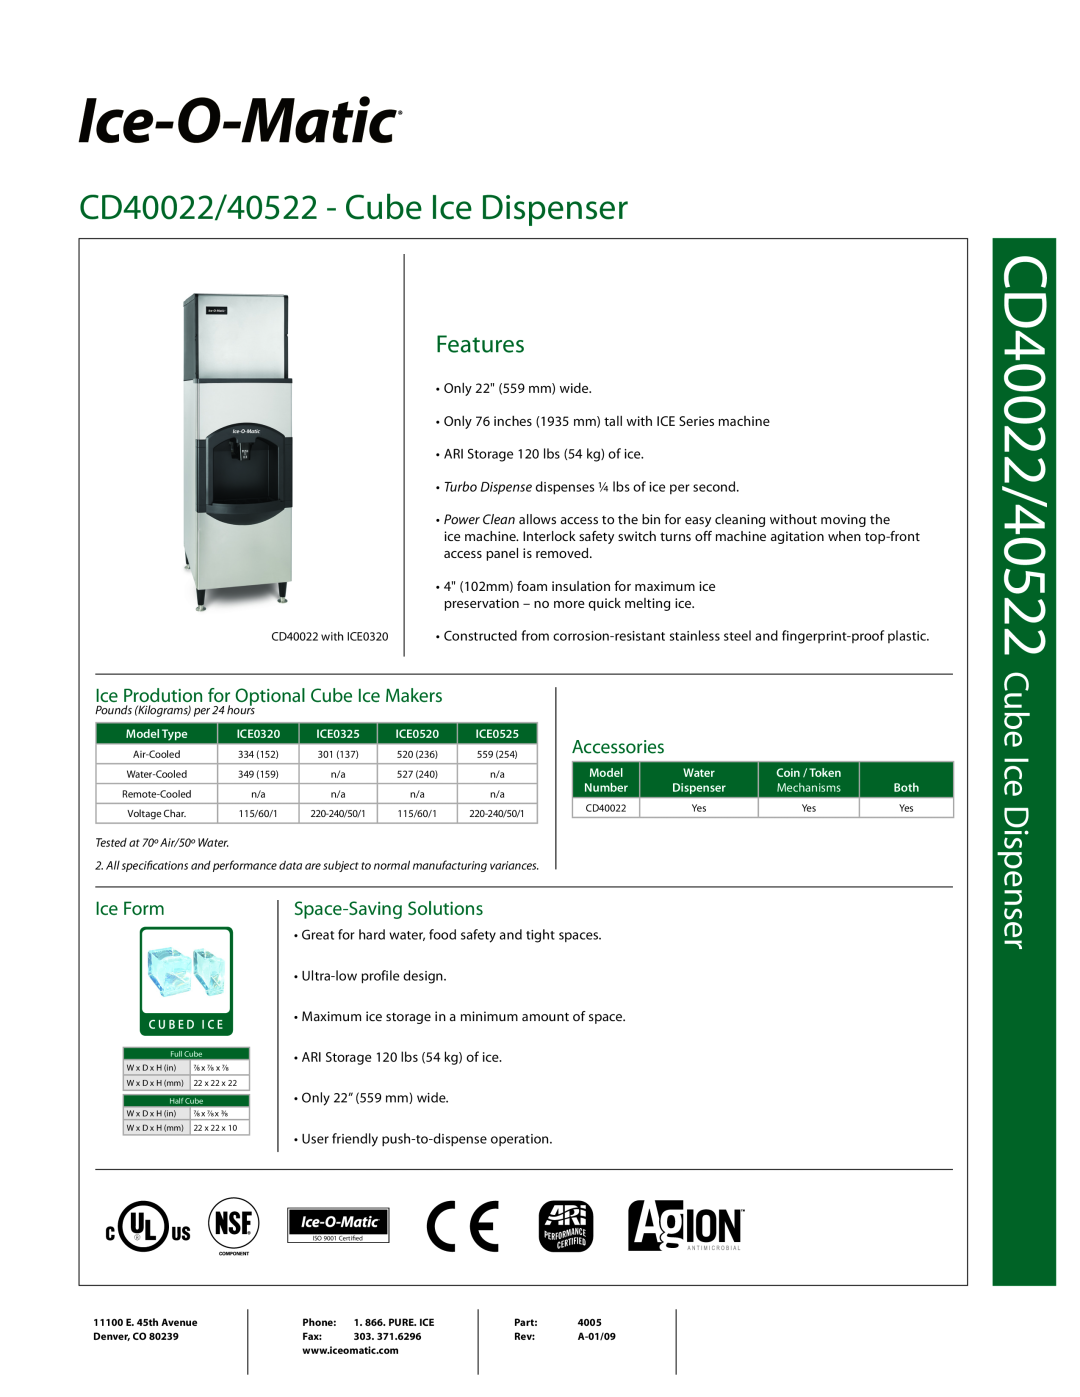 Ice-O-Matic CD40522 manual CD40022/40522, Ice Prodution for Optional Cube Ice Makers, Accessories, Ice Form, Features 